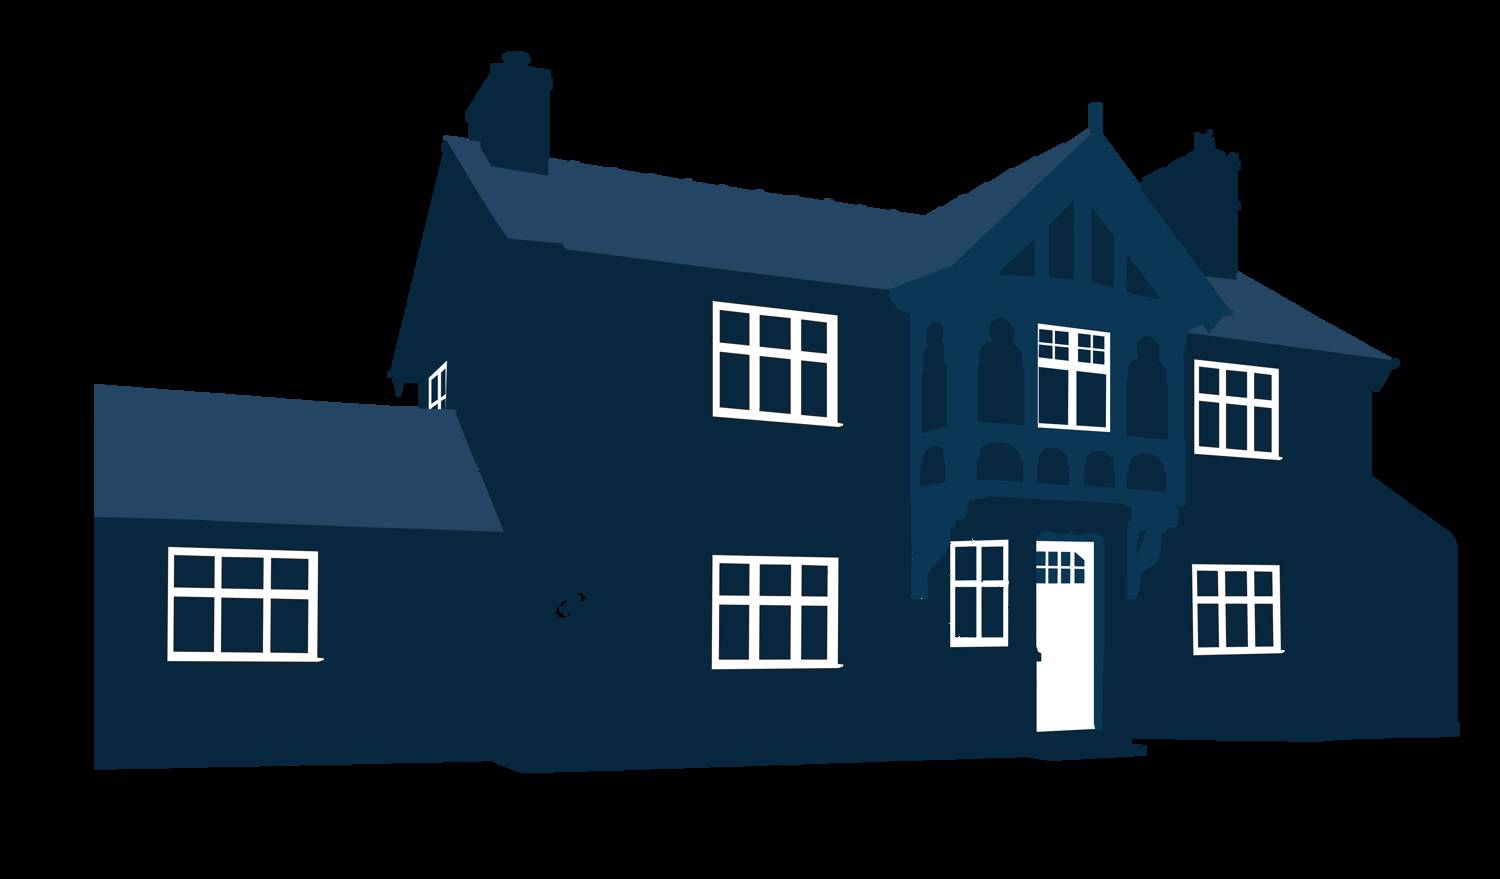 An image of The Bull public house in Shocklach altered so it appears in silhouette 